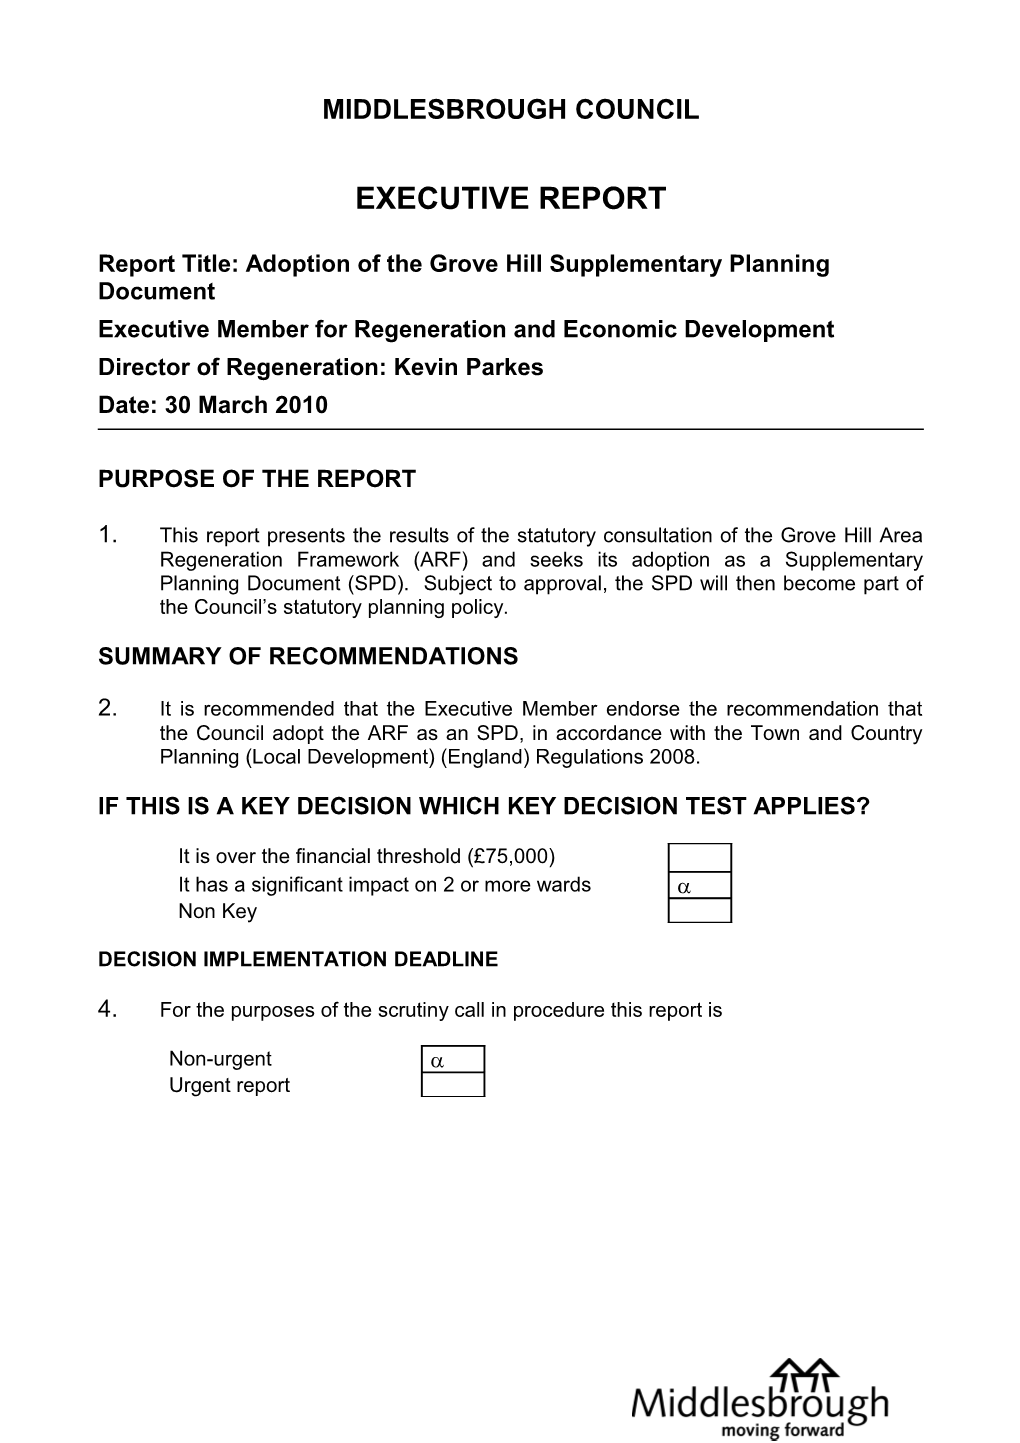 Report Title: Adoption of the Grove Hill Supplementary Planning Document